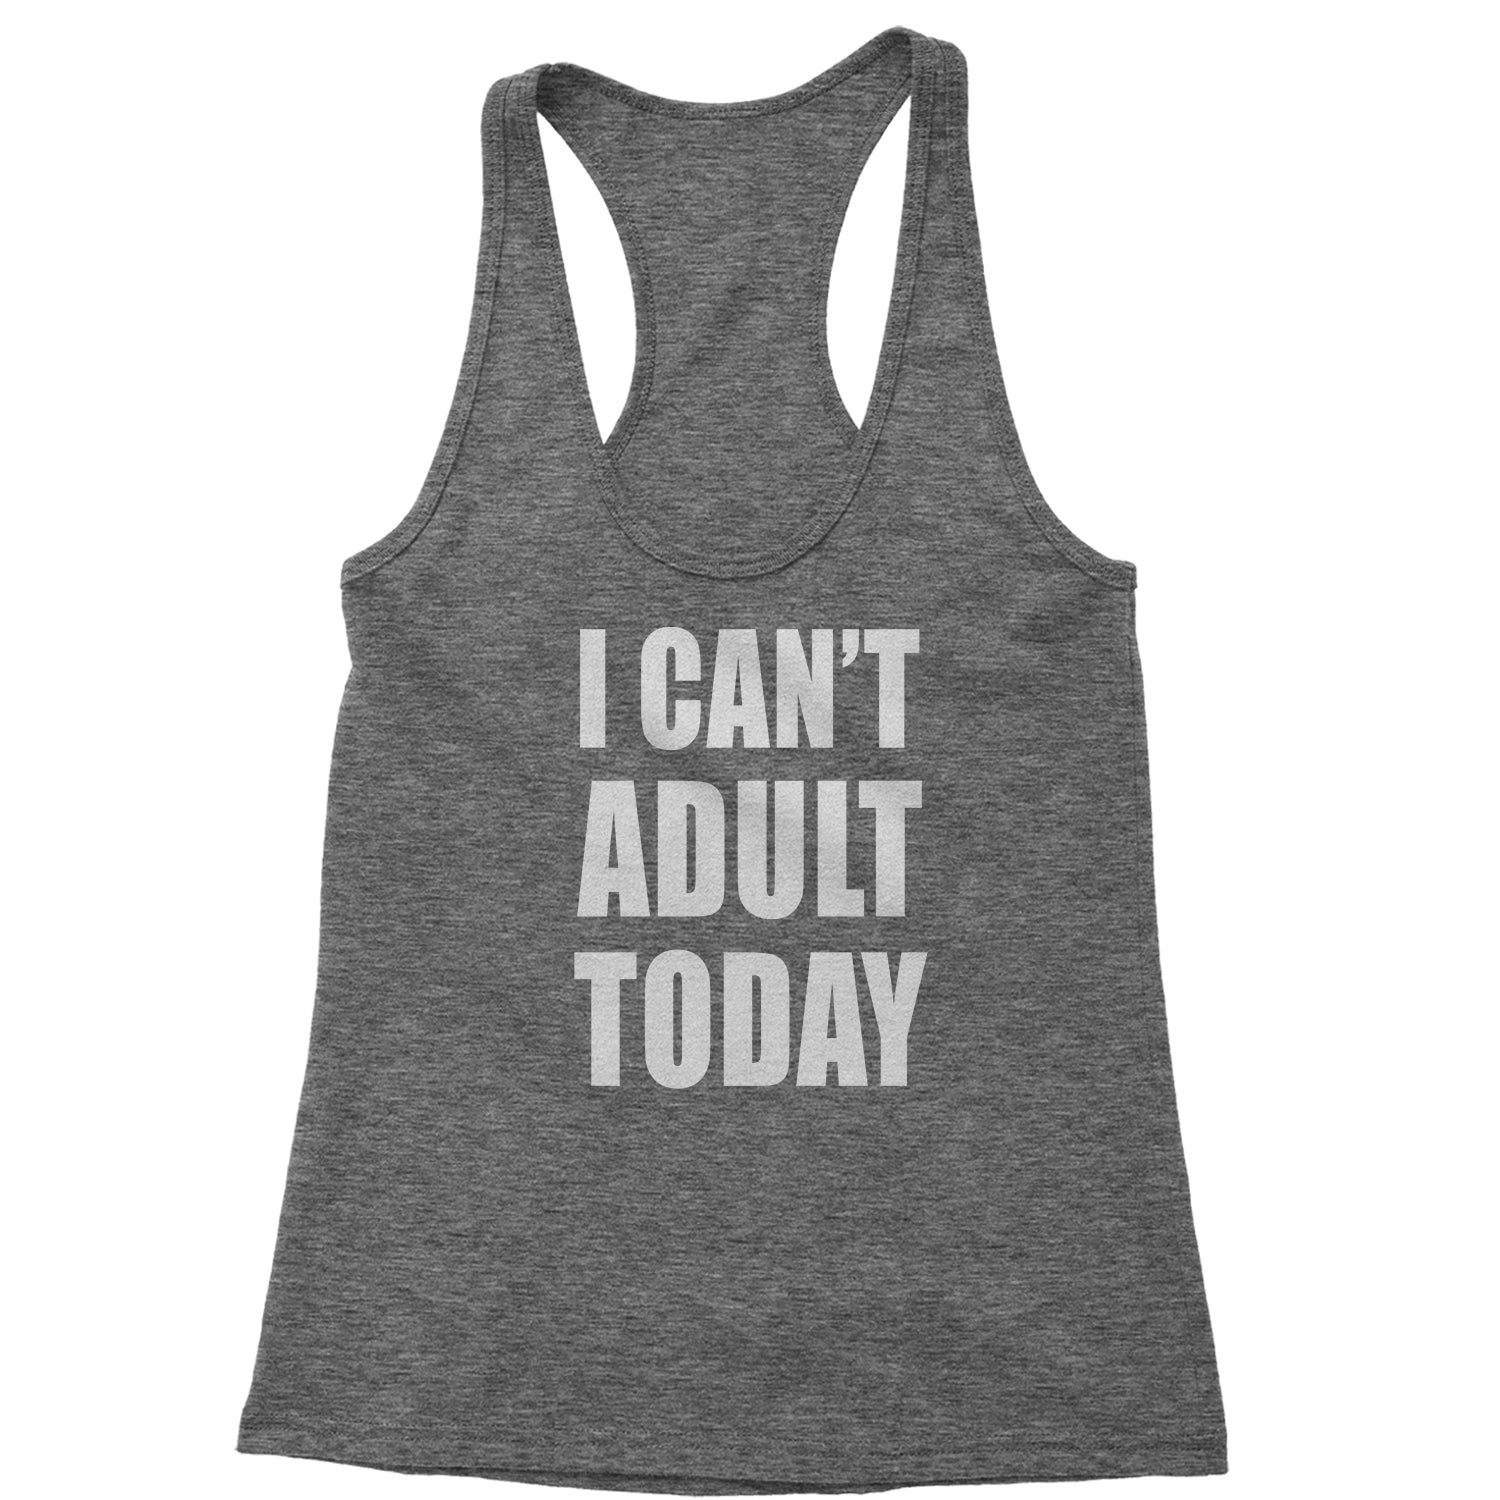 I Can't Adult Today Racerback Tank Top for Women adult, cant, I, today by Expression Tees